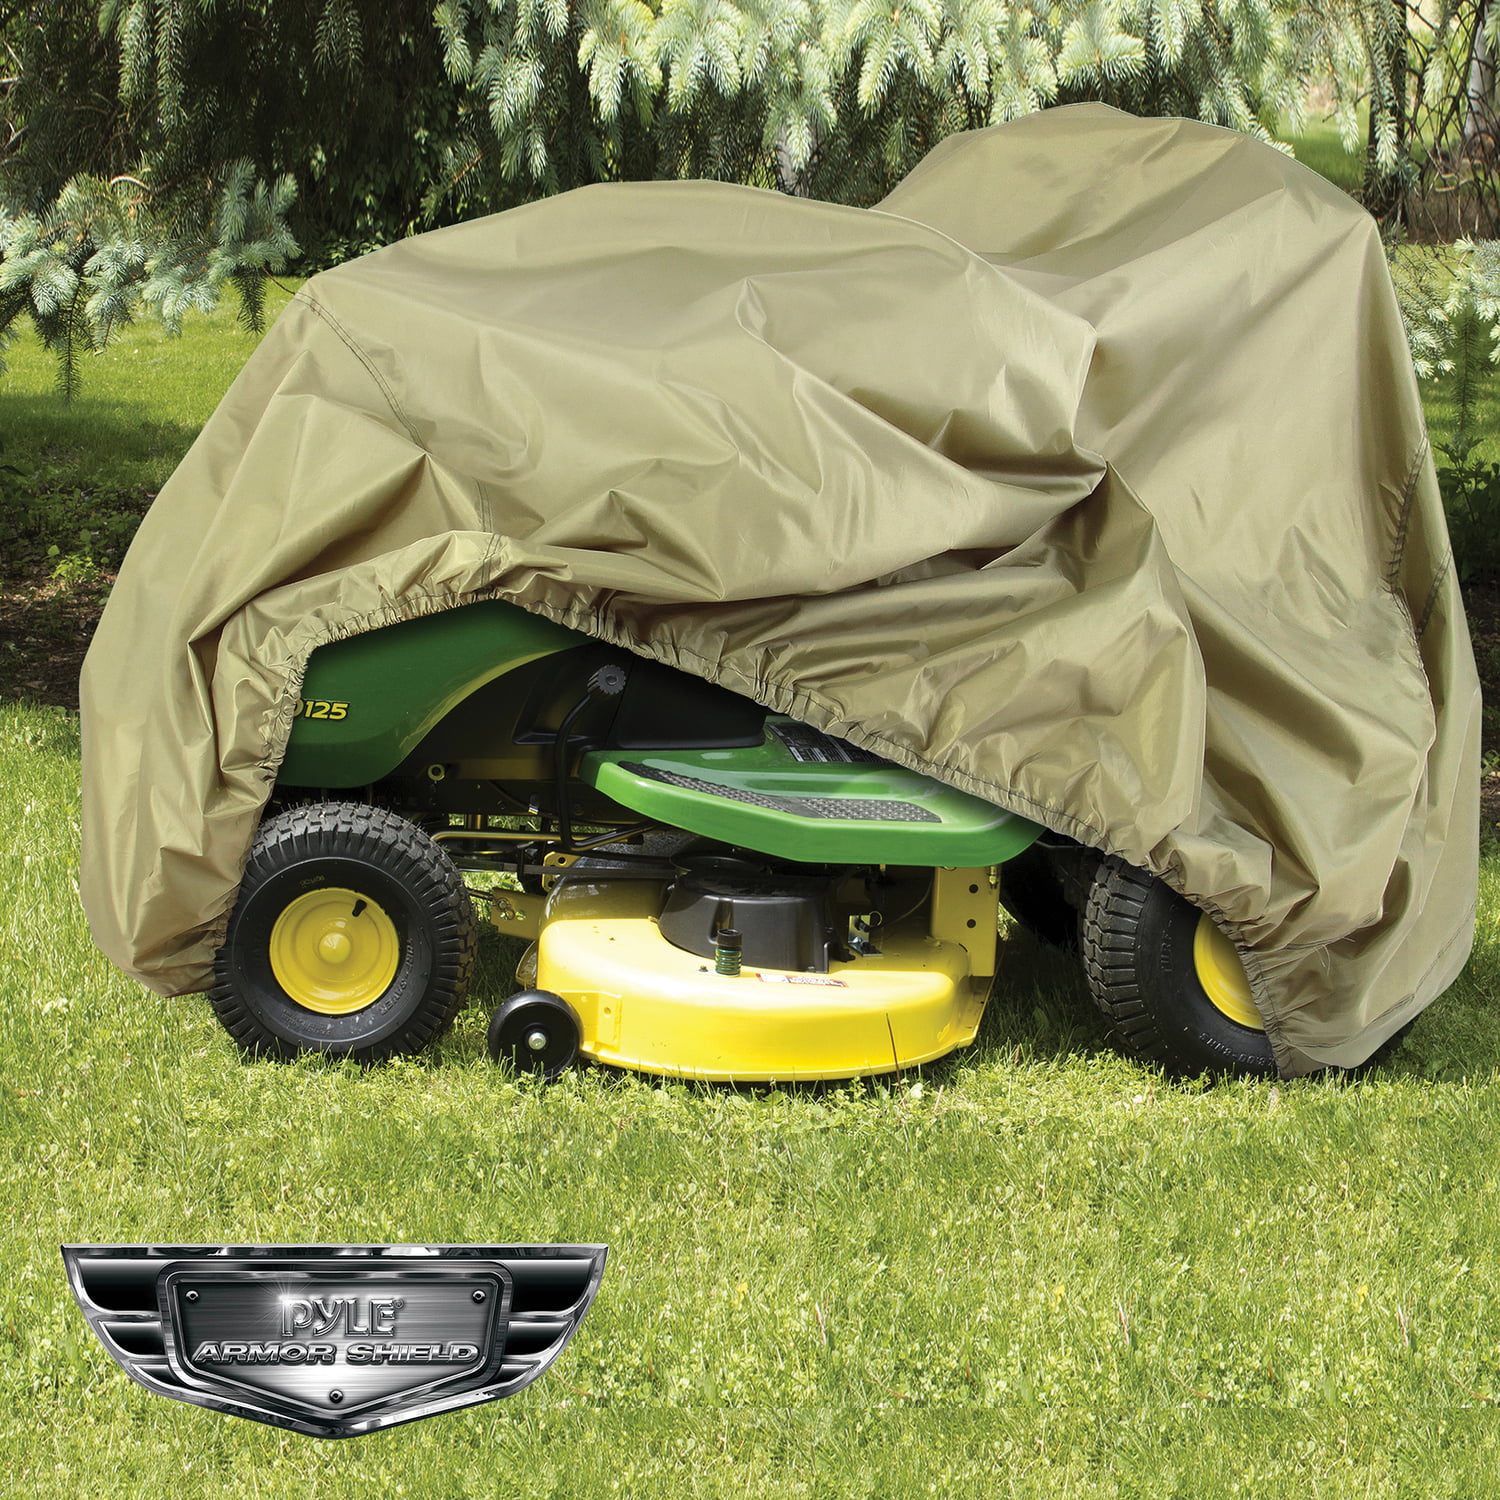 Premium Waterproof Universal Riding Lawn Mower Cover 55 Inch Garden Yard Tractor Storage Cover Black US Stock 